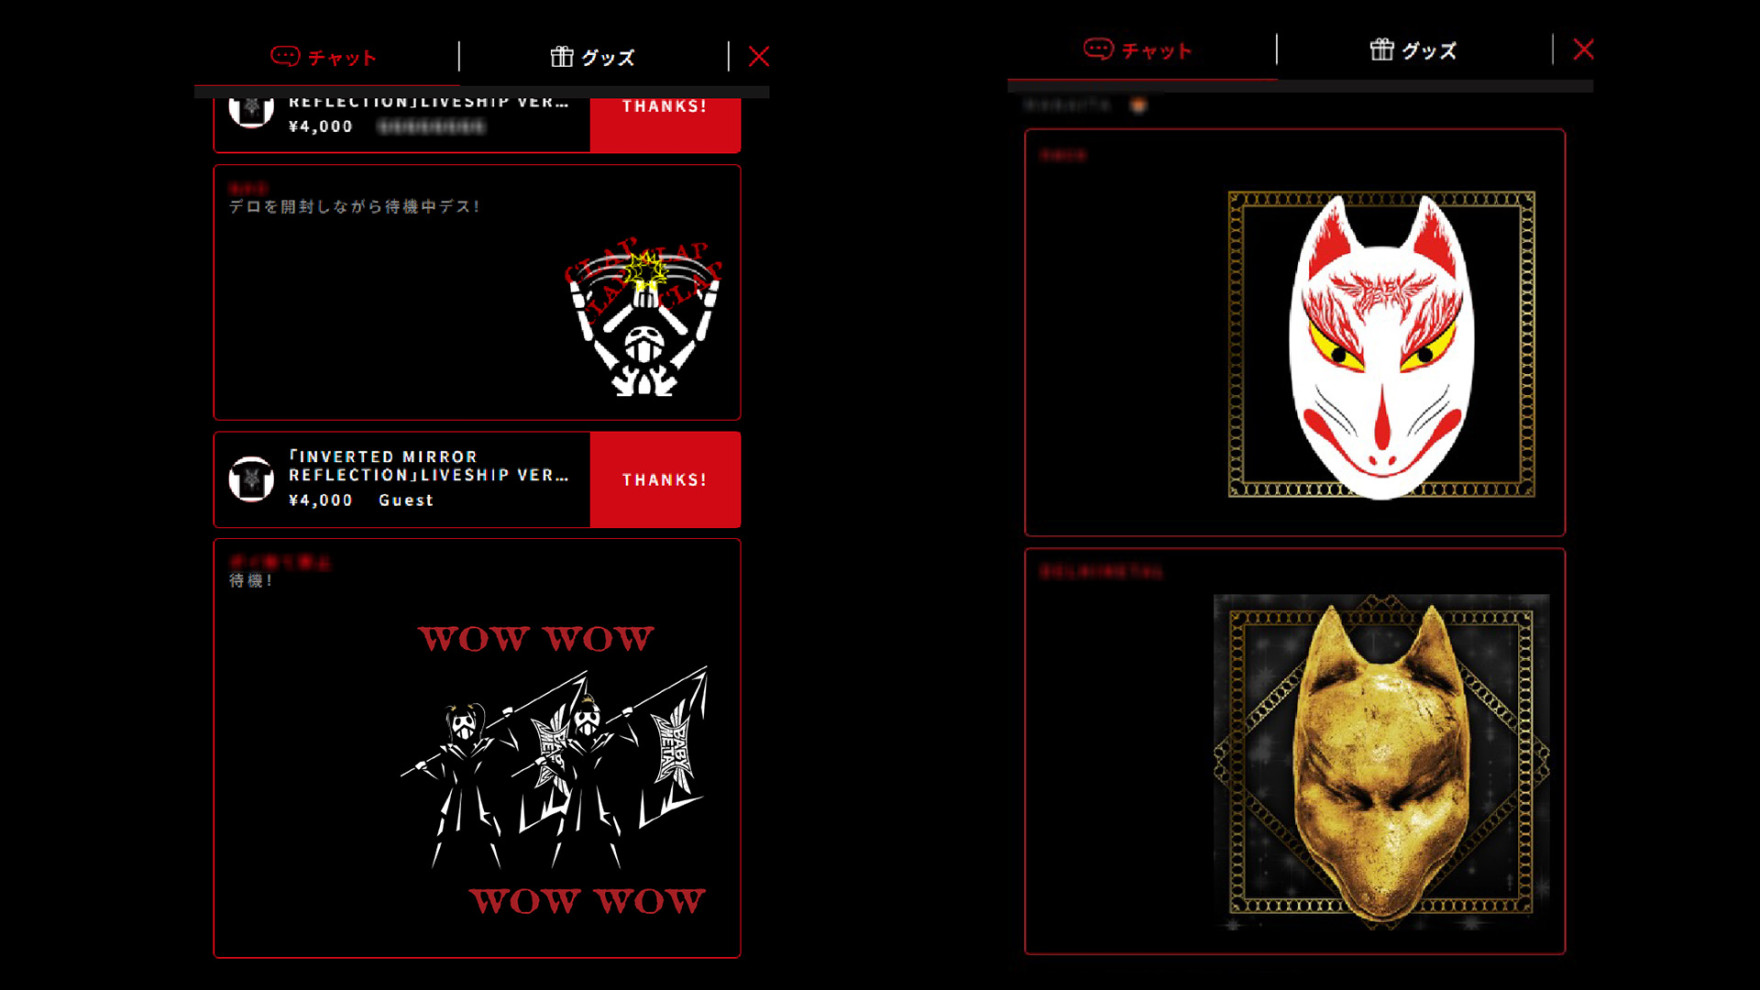 Kulture has launched NFT for "Viewing Tickets" and "Paid Stickers" for BABYMETAL Live Streaming.
The stickers are no longer expendable.
Users now can make own sticker collection as a token of the support for the artists!!